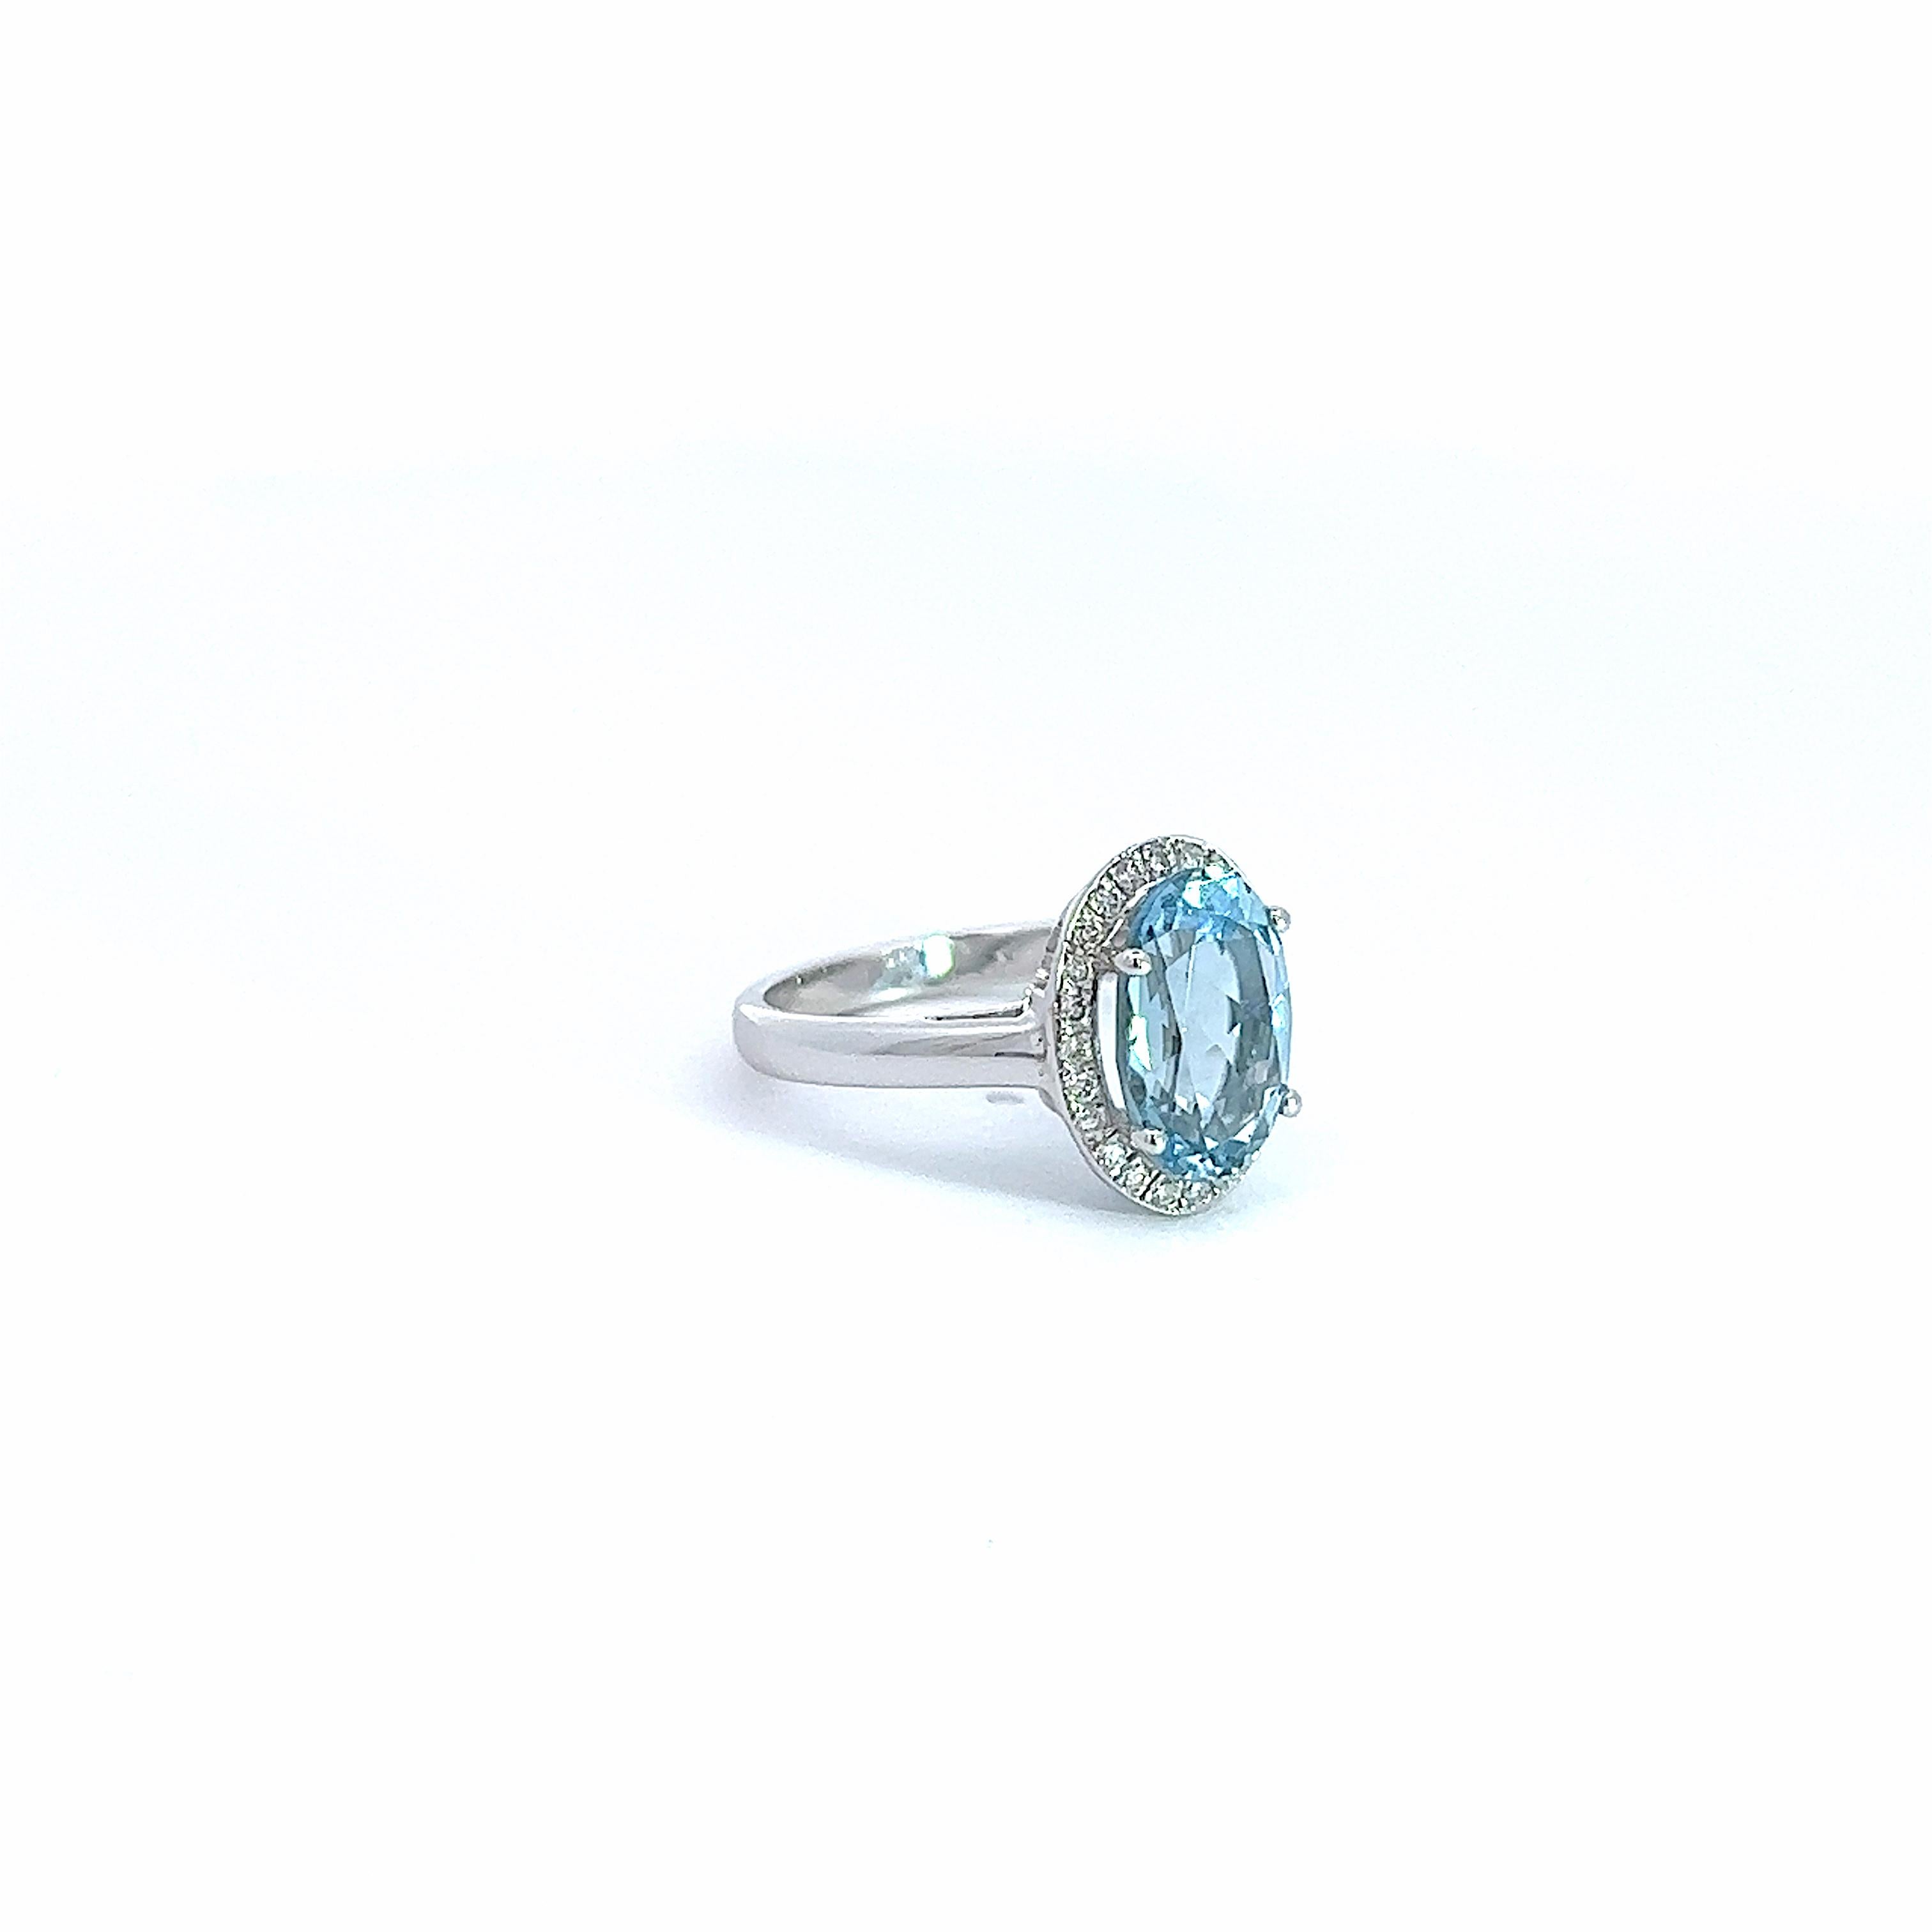 Georgios Collections 18 Karat White Gold Aquamarine Ring with Diamond Bezel For Sale 2